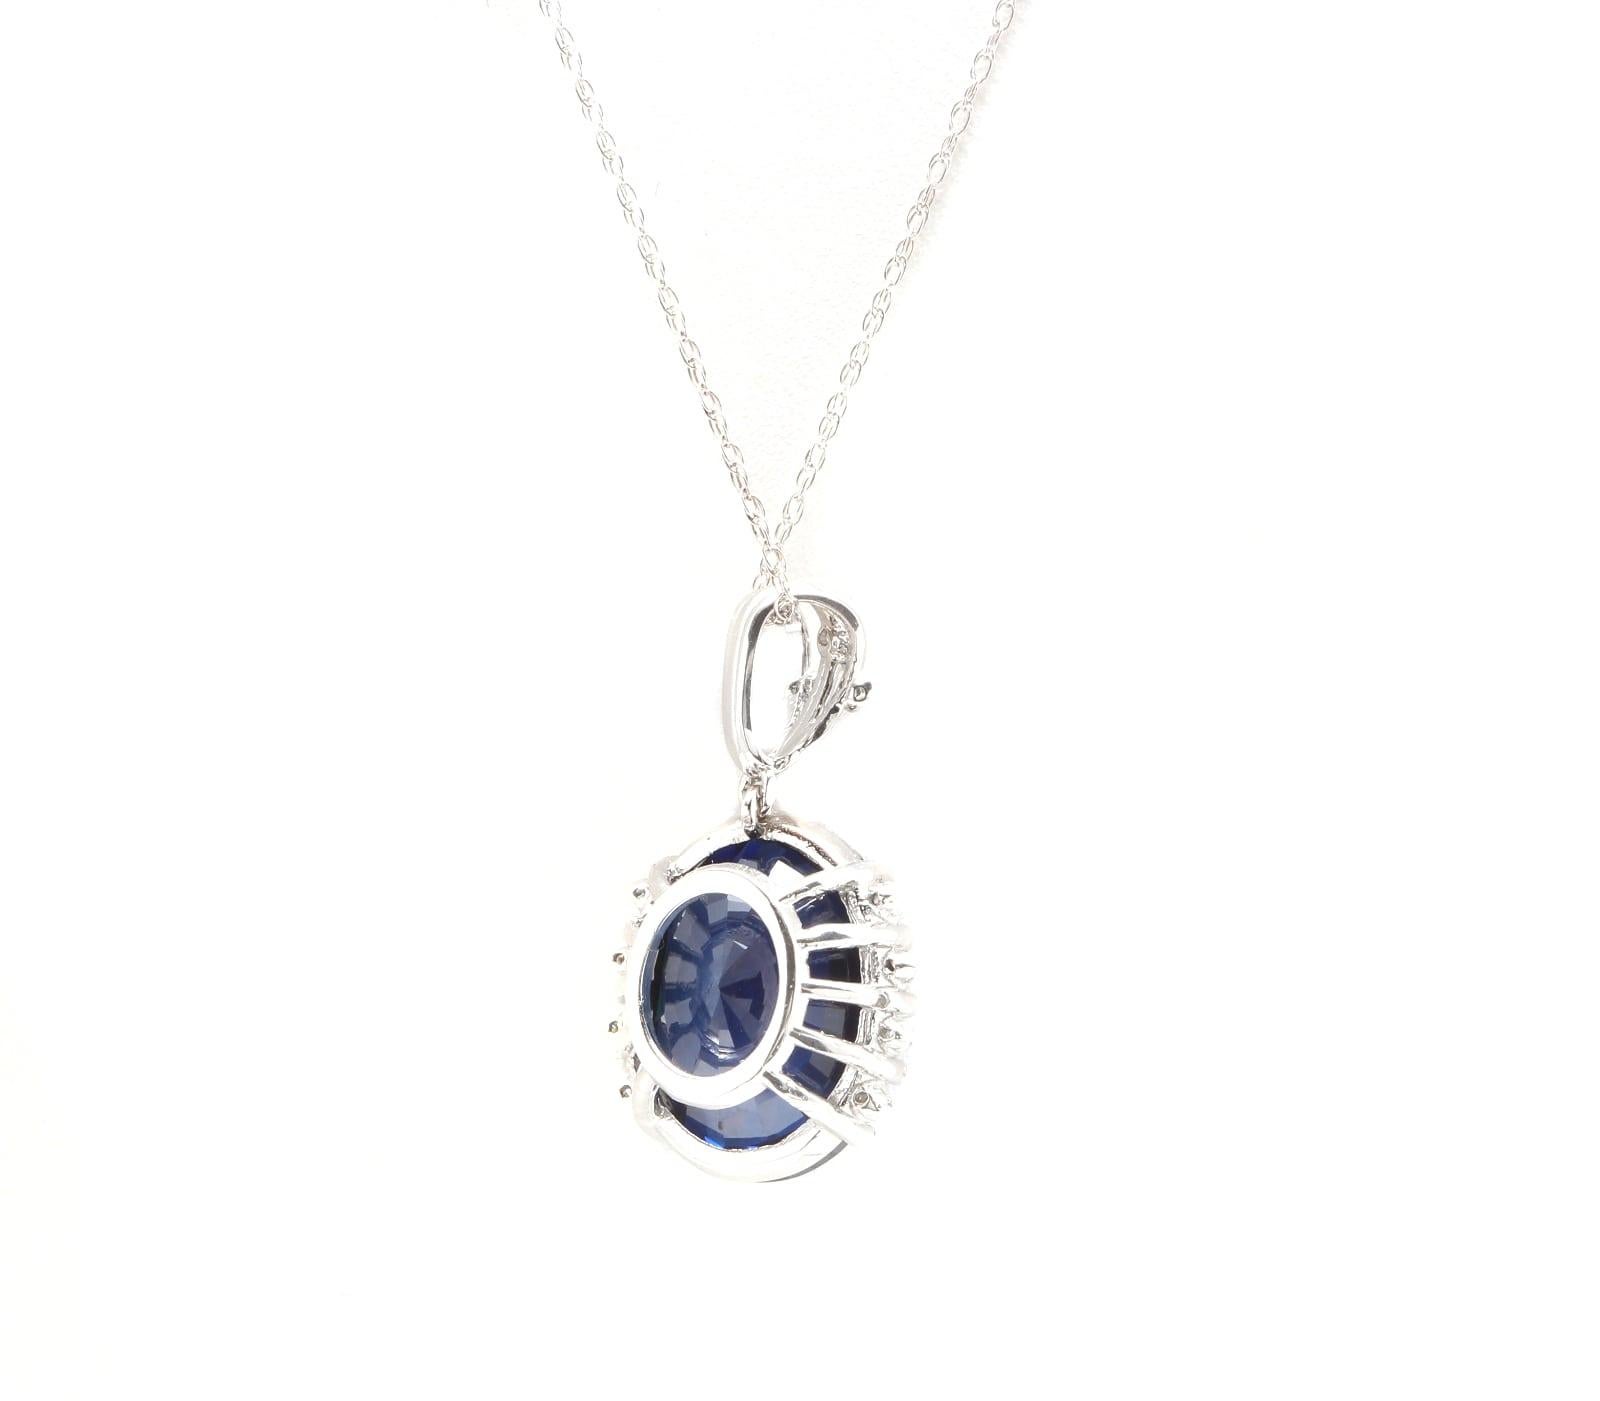 13.20Ct Lab Created Sapphire and Diamond 14K Solid White Gold Necklace

Amazing looking piece! 

Stamped: 14K

Suggested Replacement Value: $4,000.00 

Sapphire Weights: Approx. 13.00 Carats 

Sapphire Measures: Approx. 16.00 x 12.00mm

Total